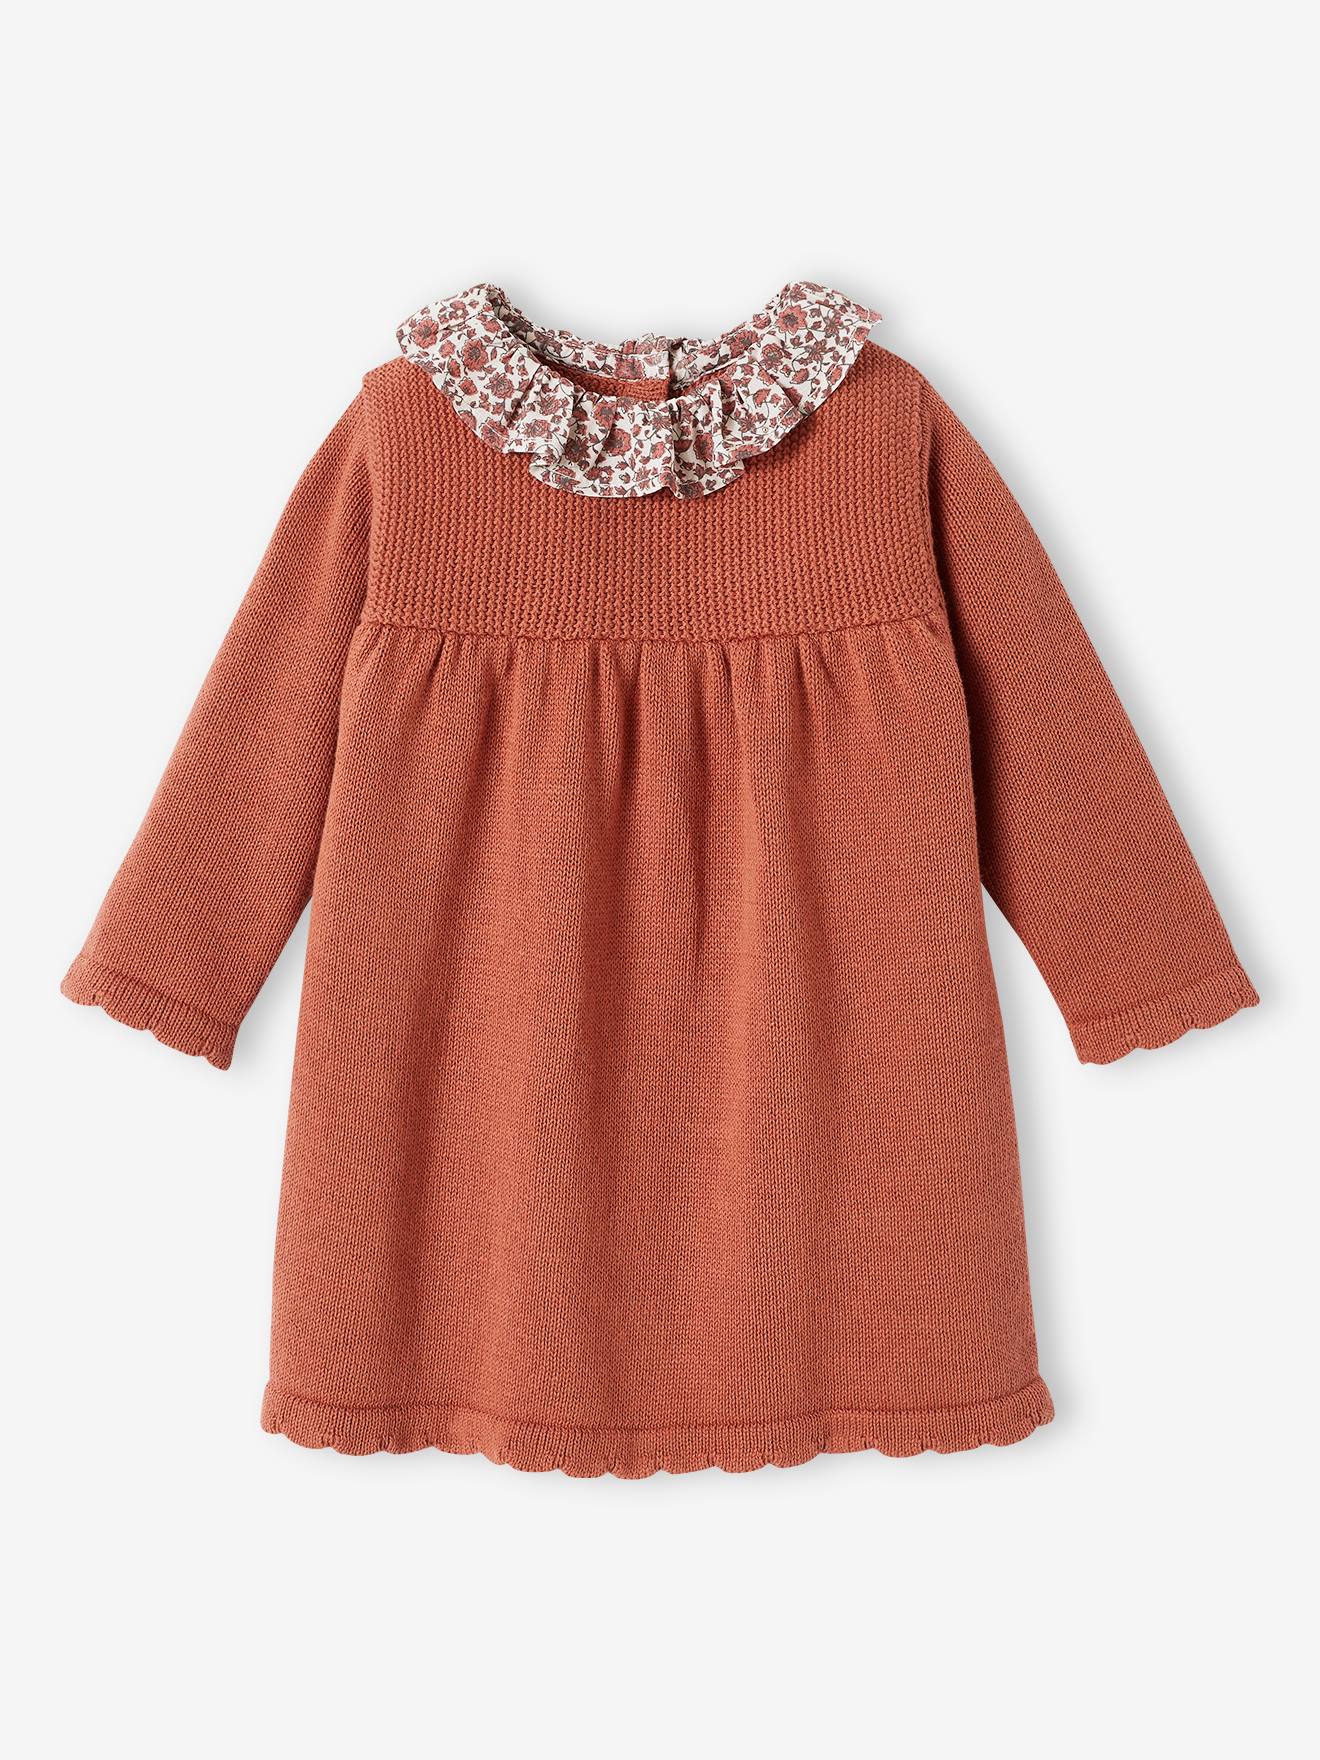 Knitted Dress with Collar in Floral Fabric for Babies rust